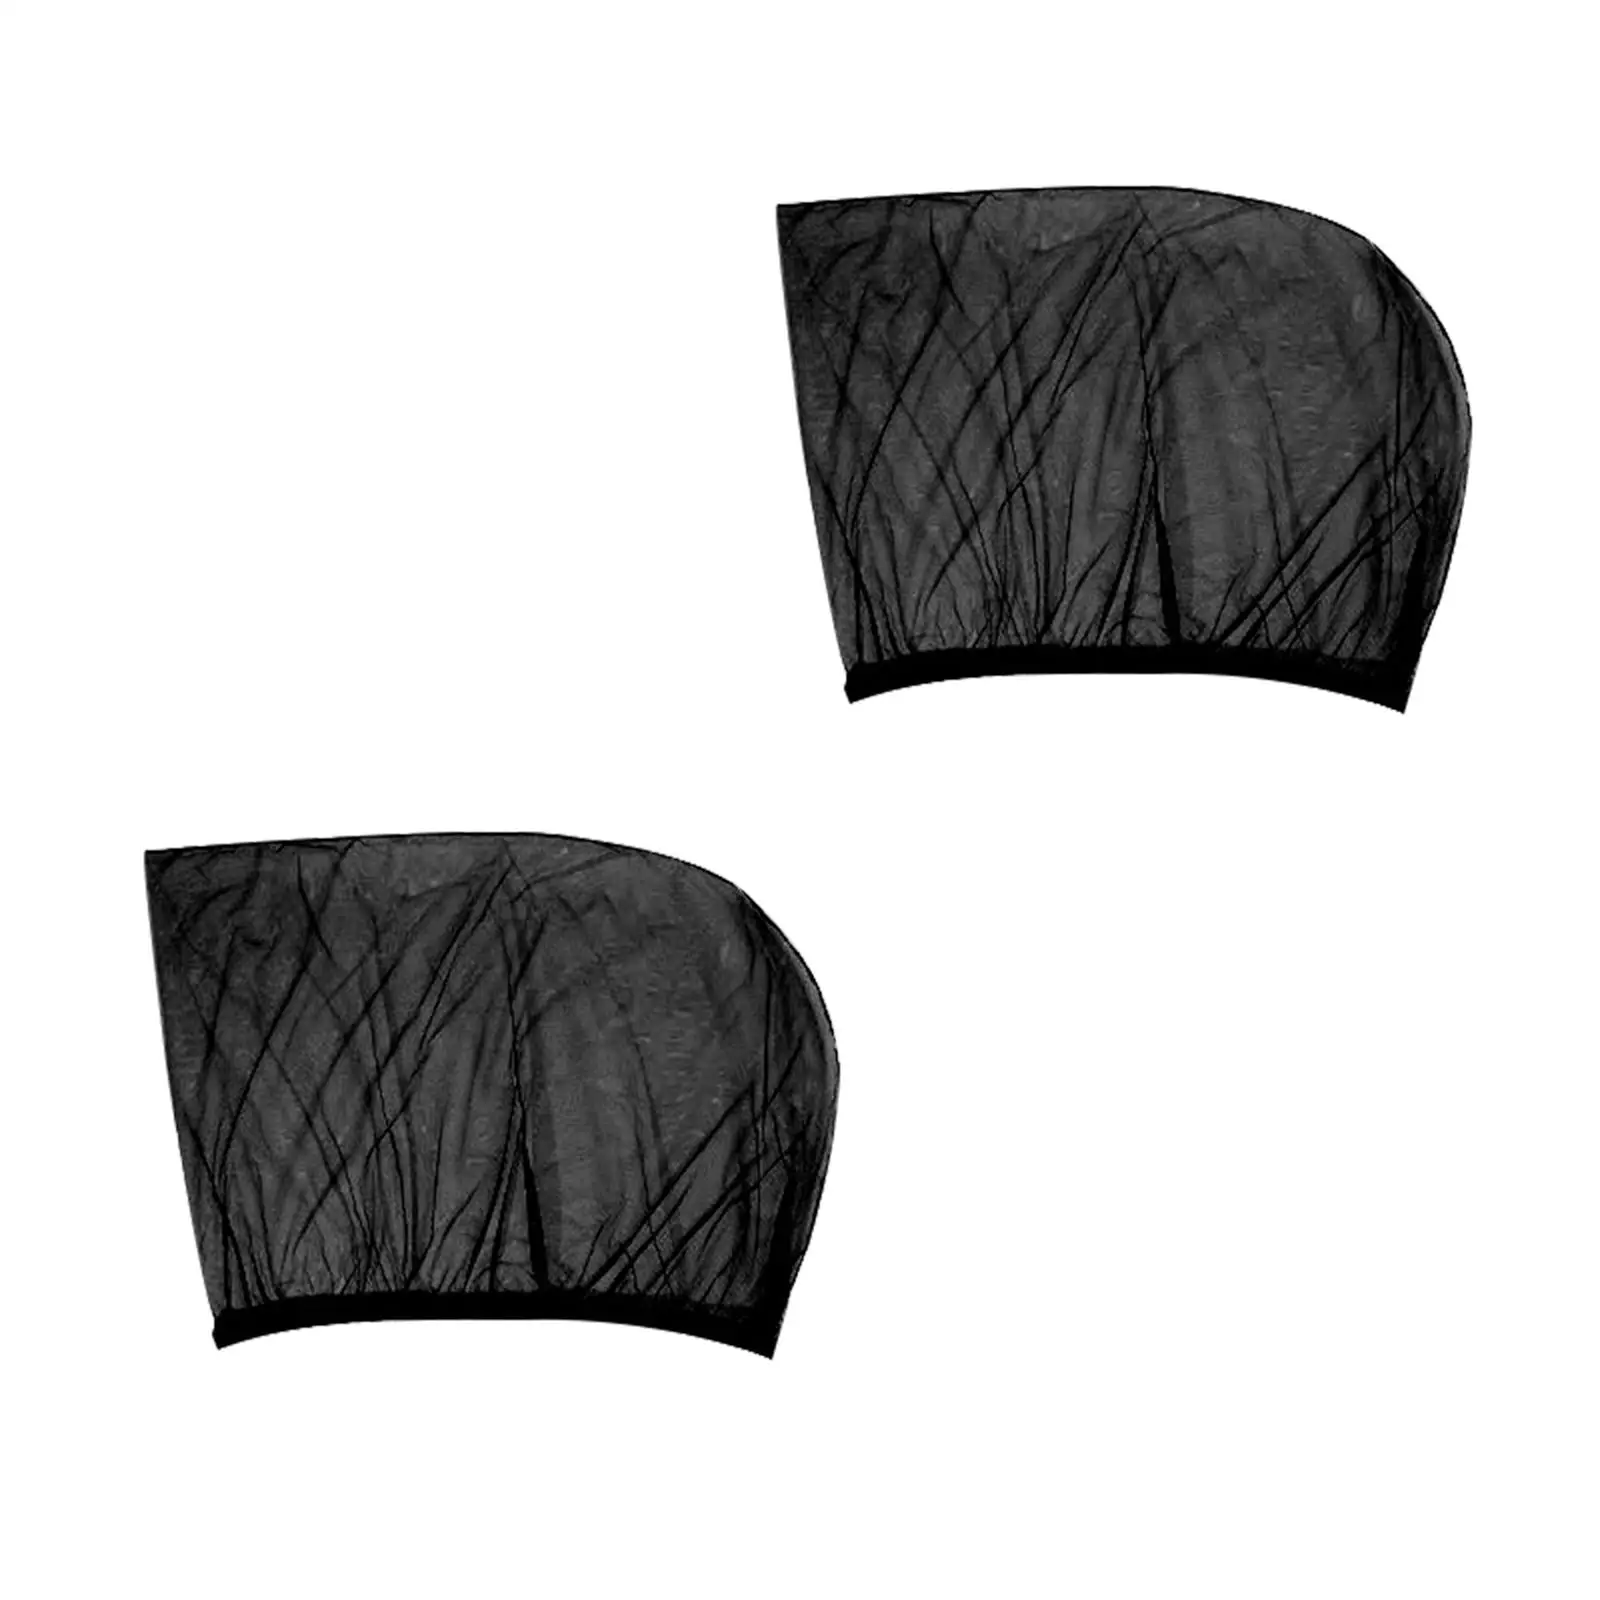 Sunlight Car Window Shades Breathable Stretchy  Visor Interior Accessories Sun Blocking Blackout Covers  Vehicles